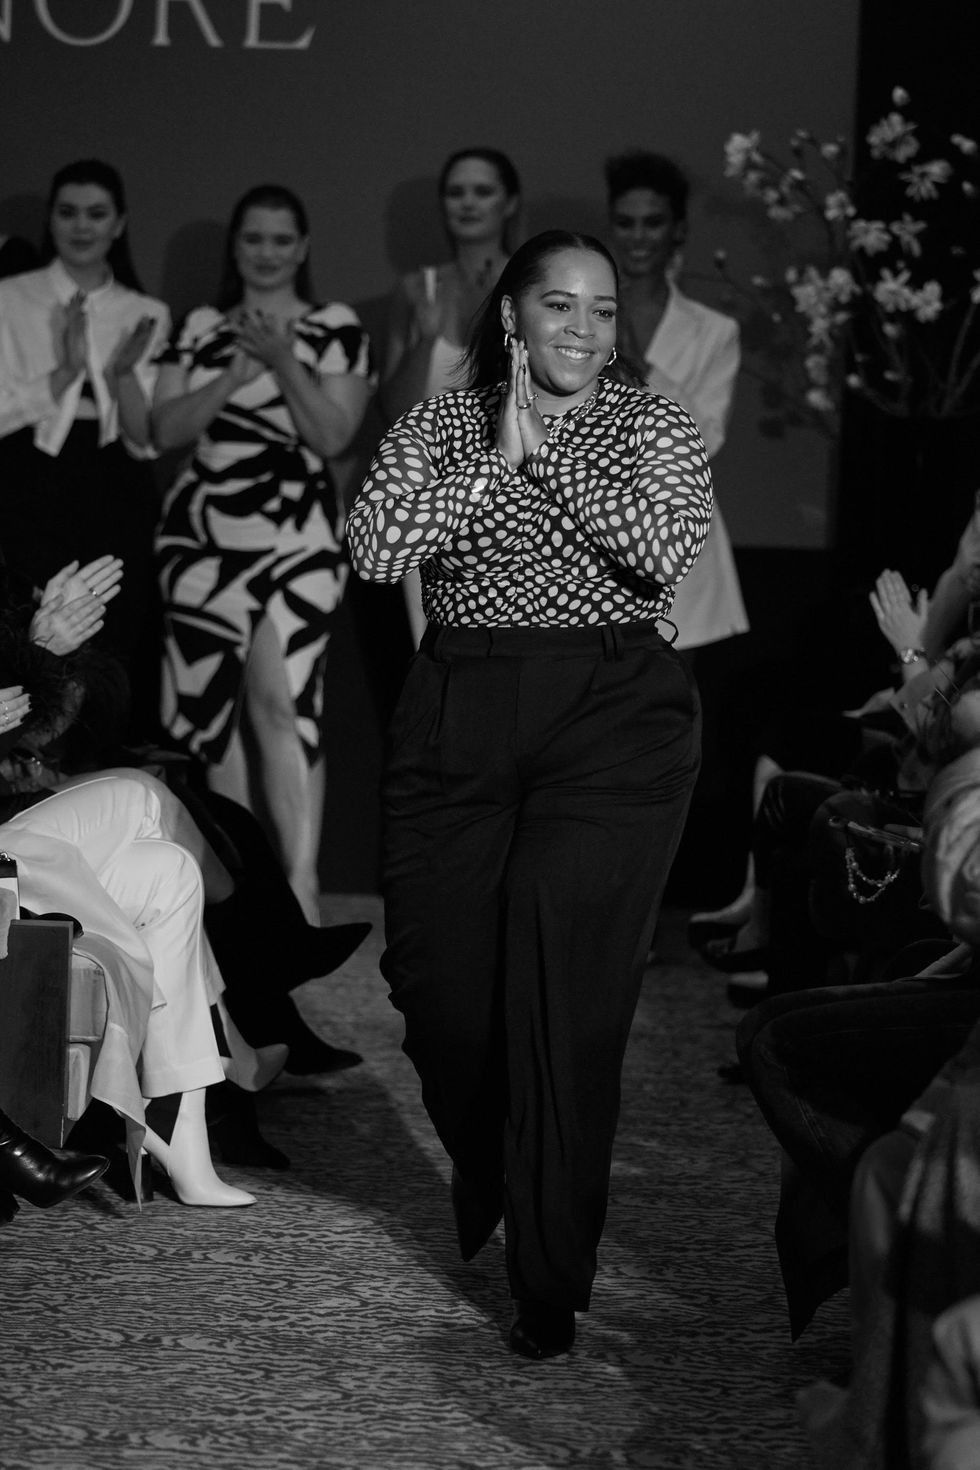 27 Times Plus-Size Models Walked at Fall 2017 New York Fashion Week